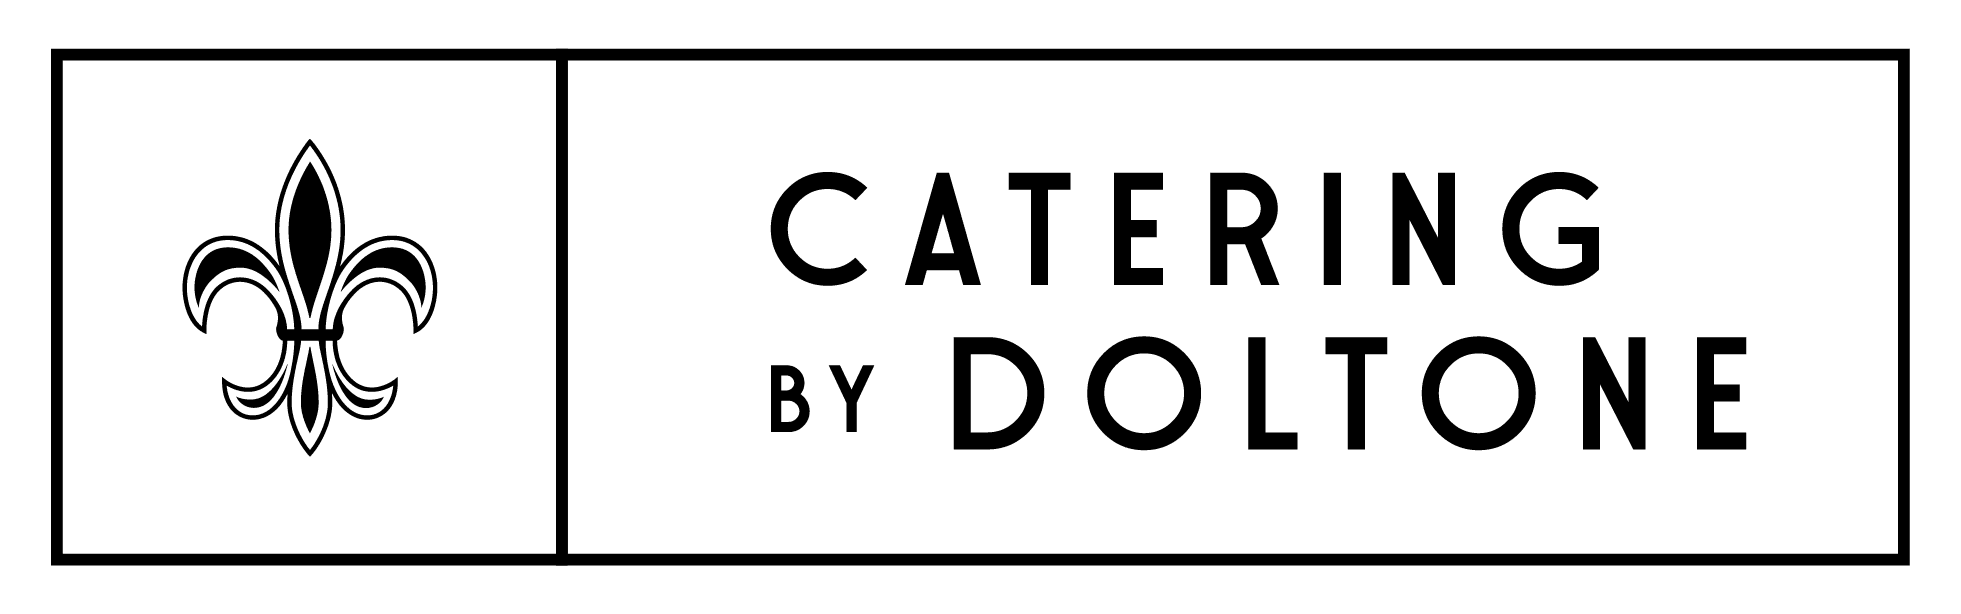 Catering by Doltone logo